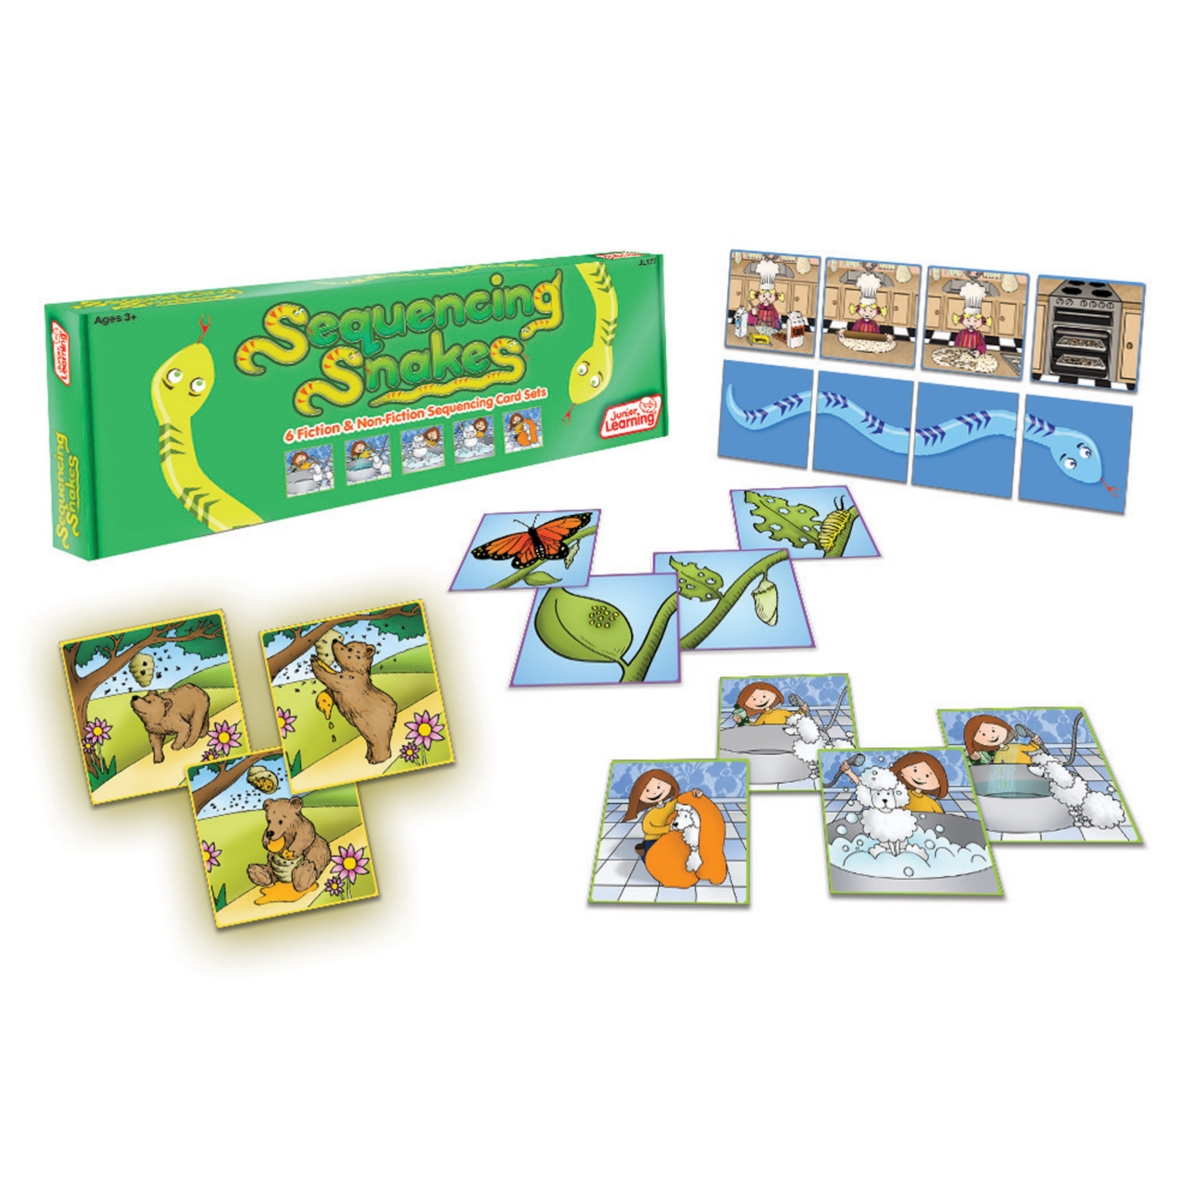 Junior Learning Kids' Sequencing Snakes Develop Comprehension And Oral Language In Multi